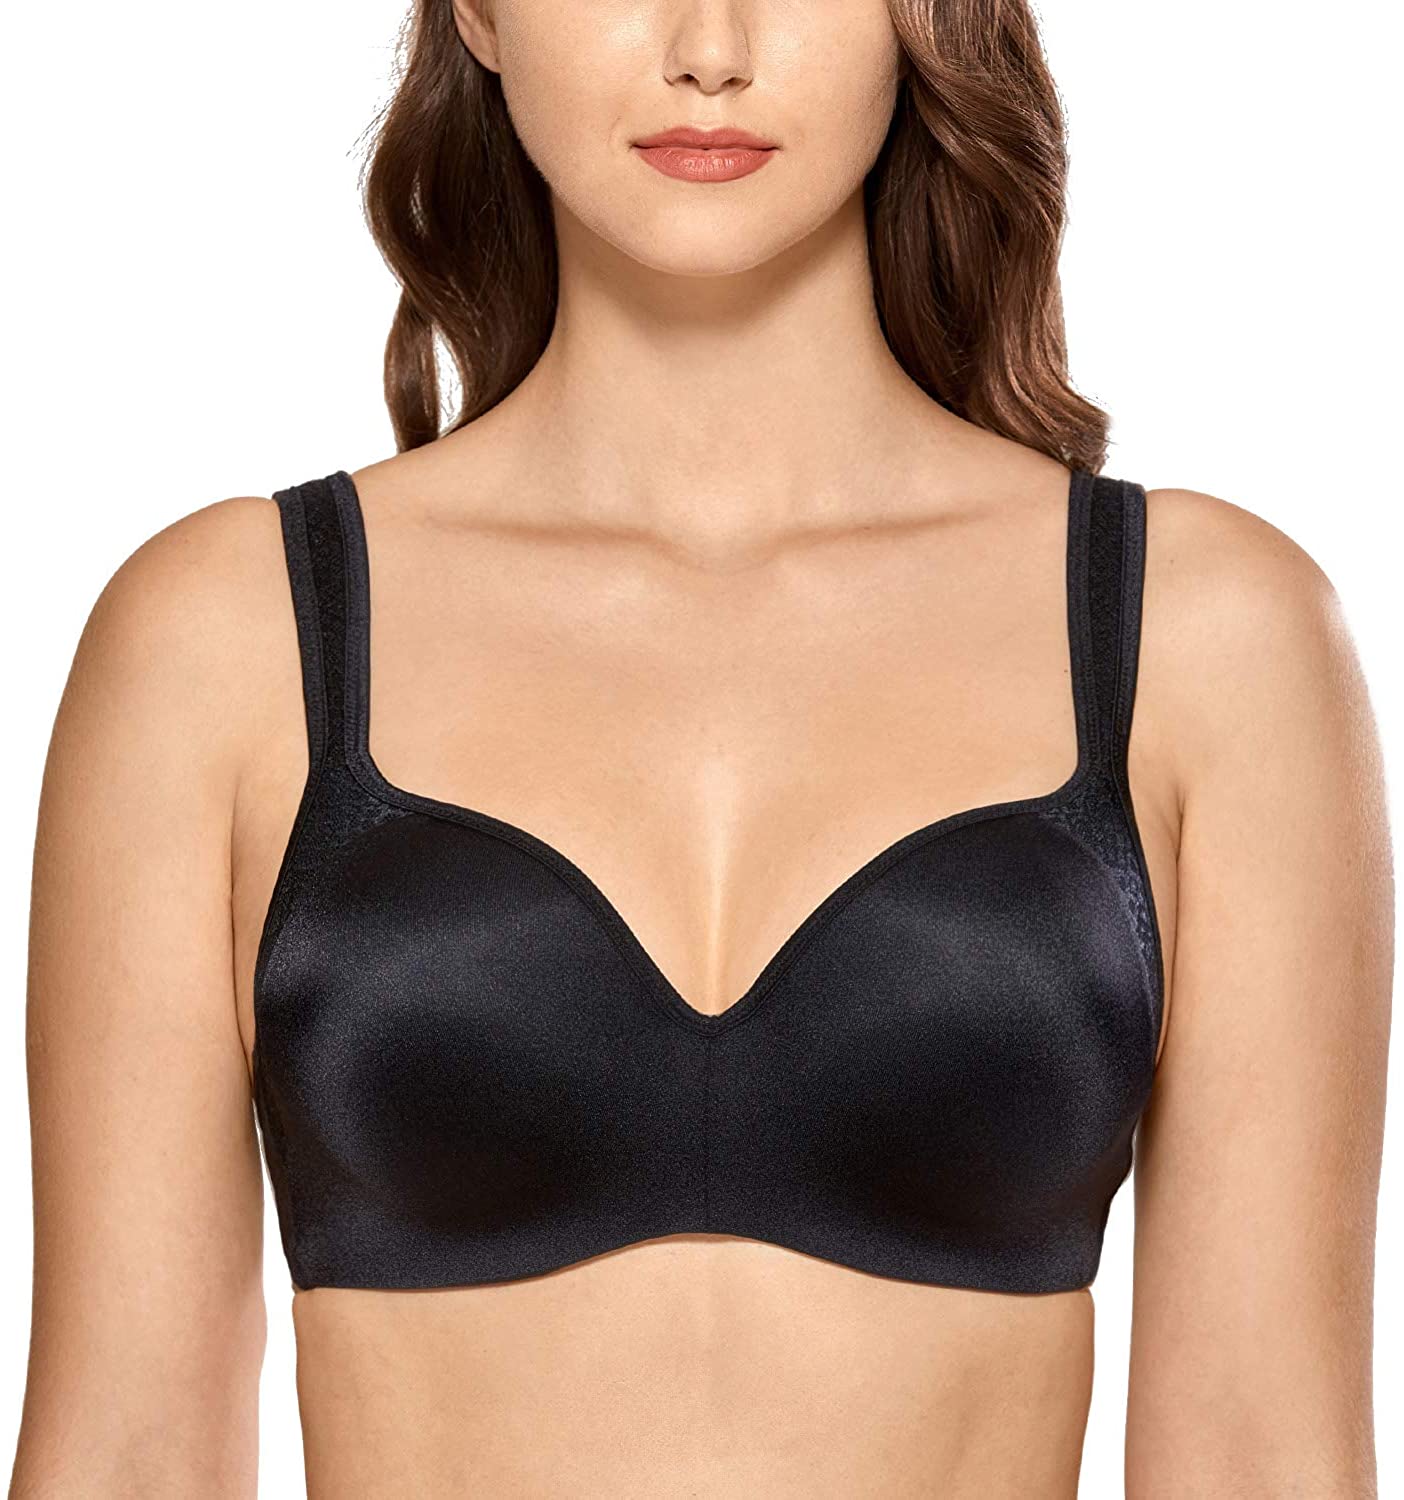 DELIMIRA Women's Seamless Smooth Underwire Full Coverage Support